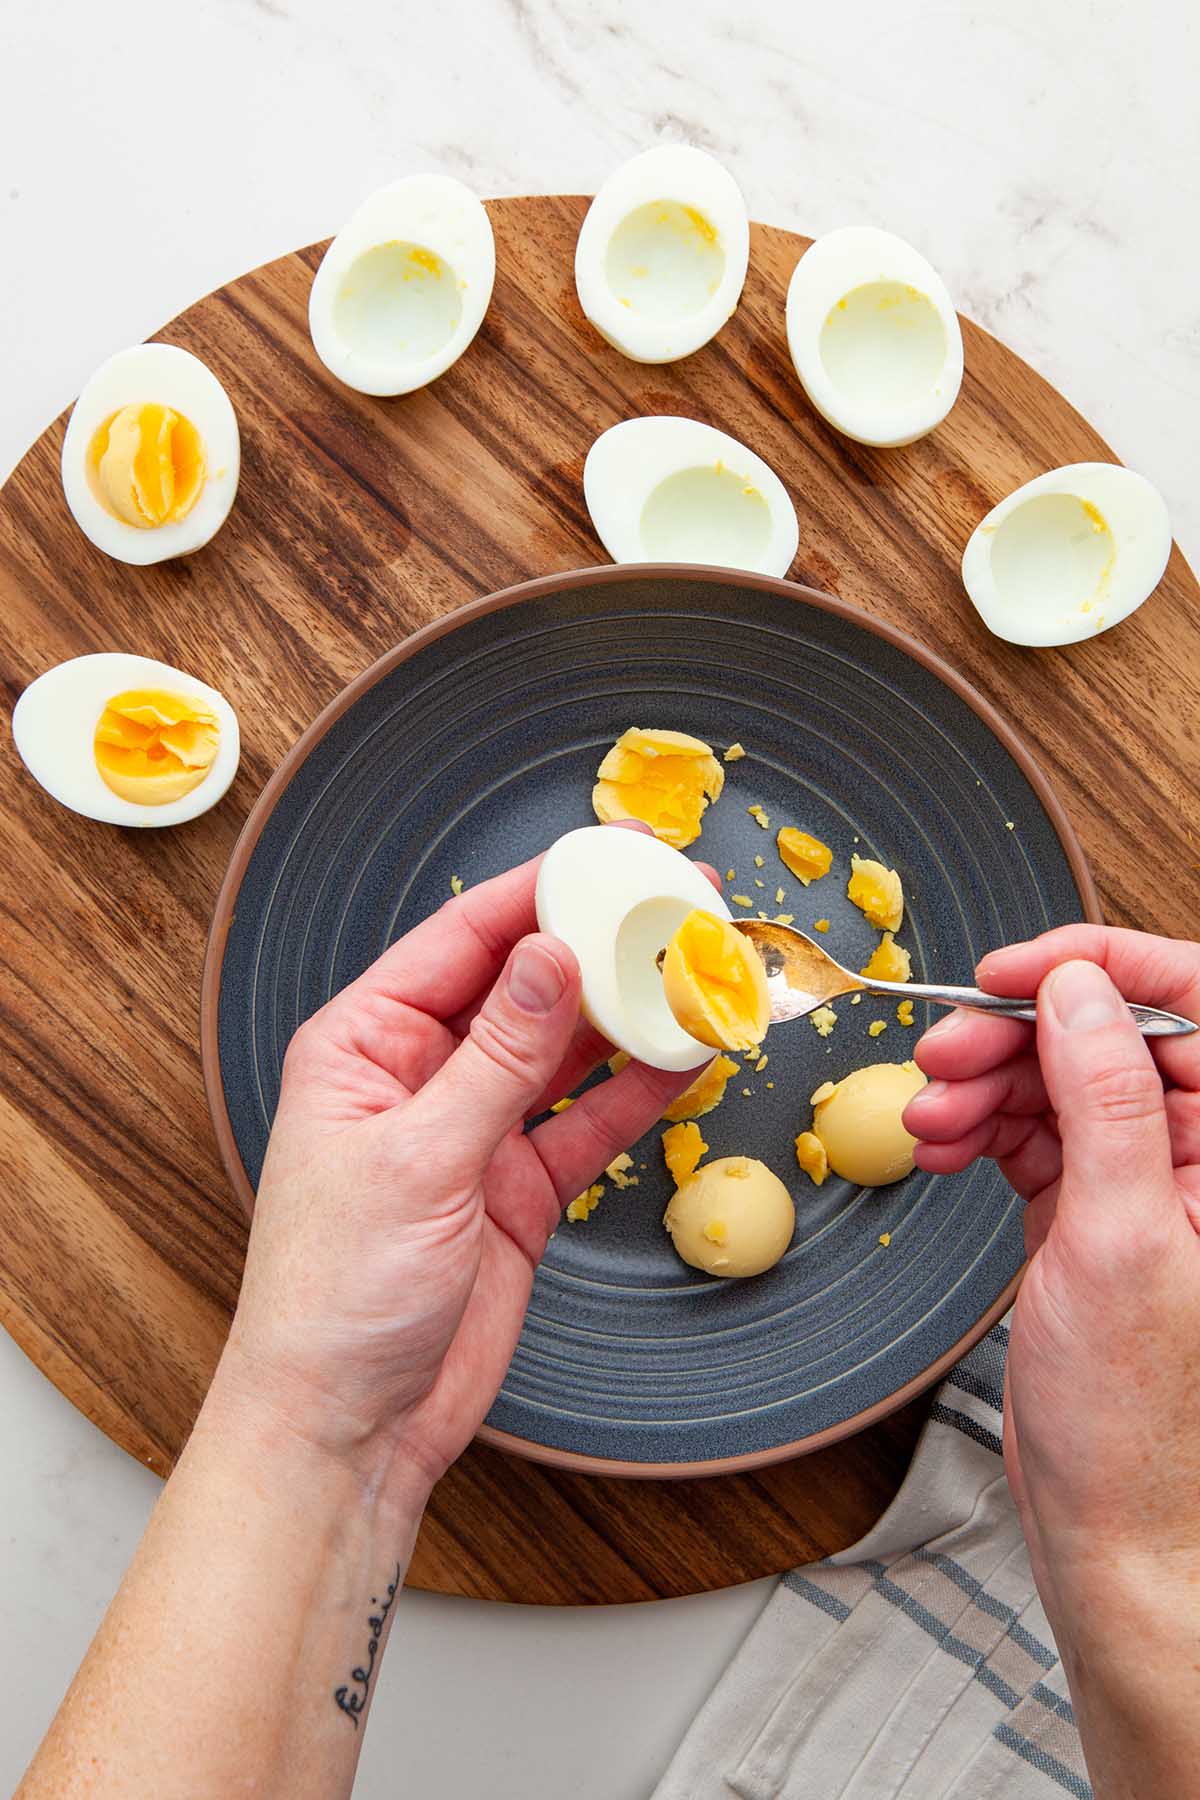 Hands scooping the yolk from a hard boiled egg into a blue bowl on a wooden board.